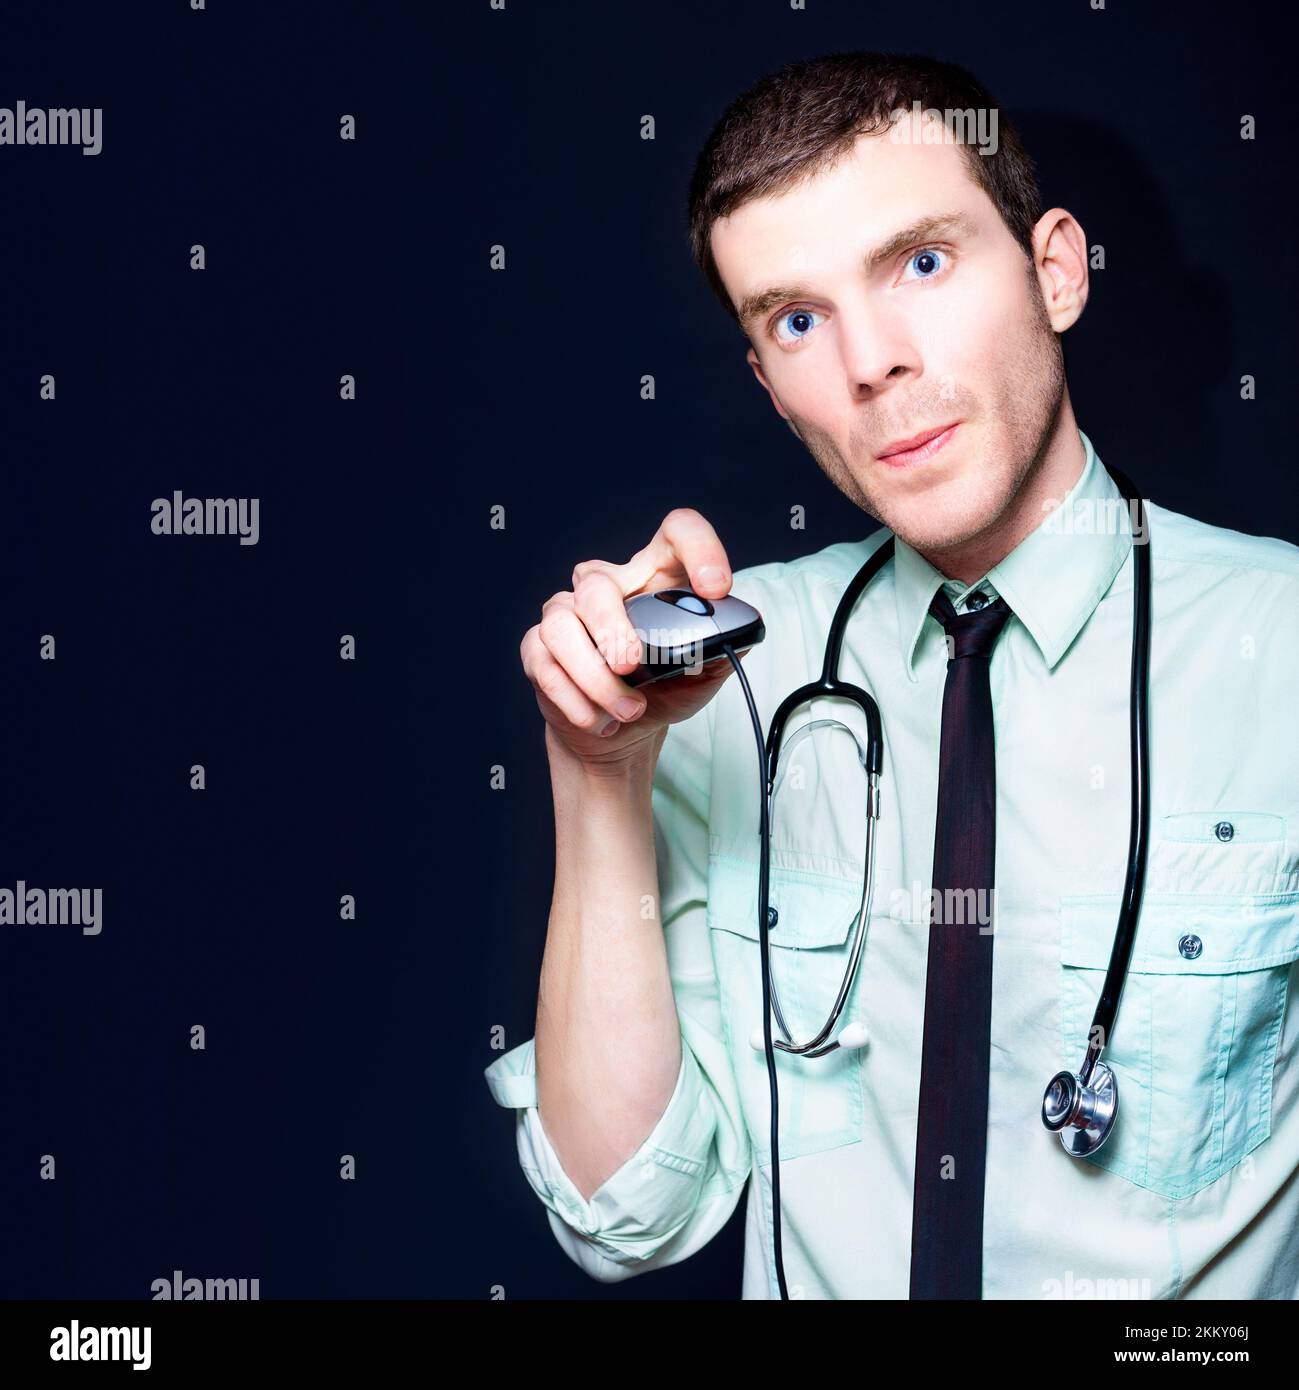 Young Modern Professional Doctor Holding Computer Mouse While Searching The Internet For New Age Health Care Stock Photo